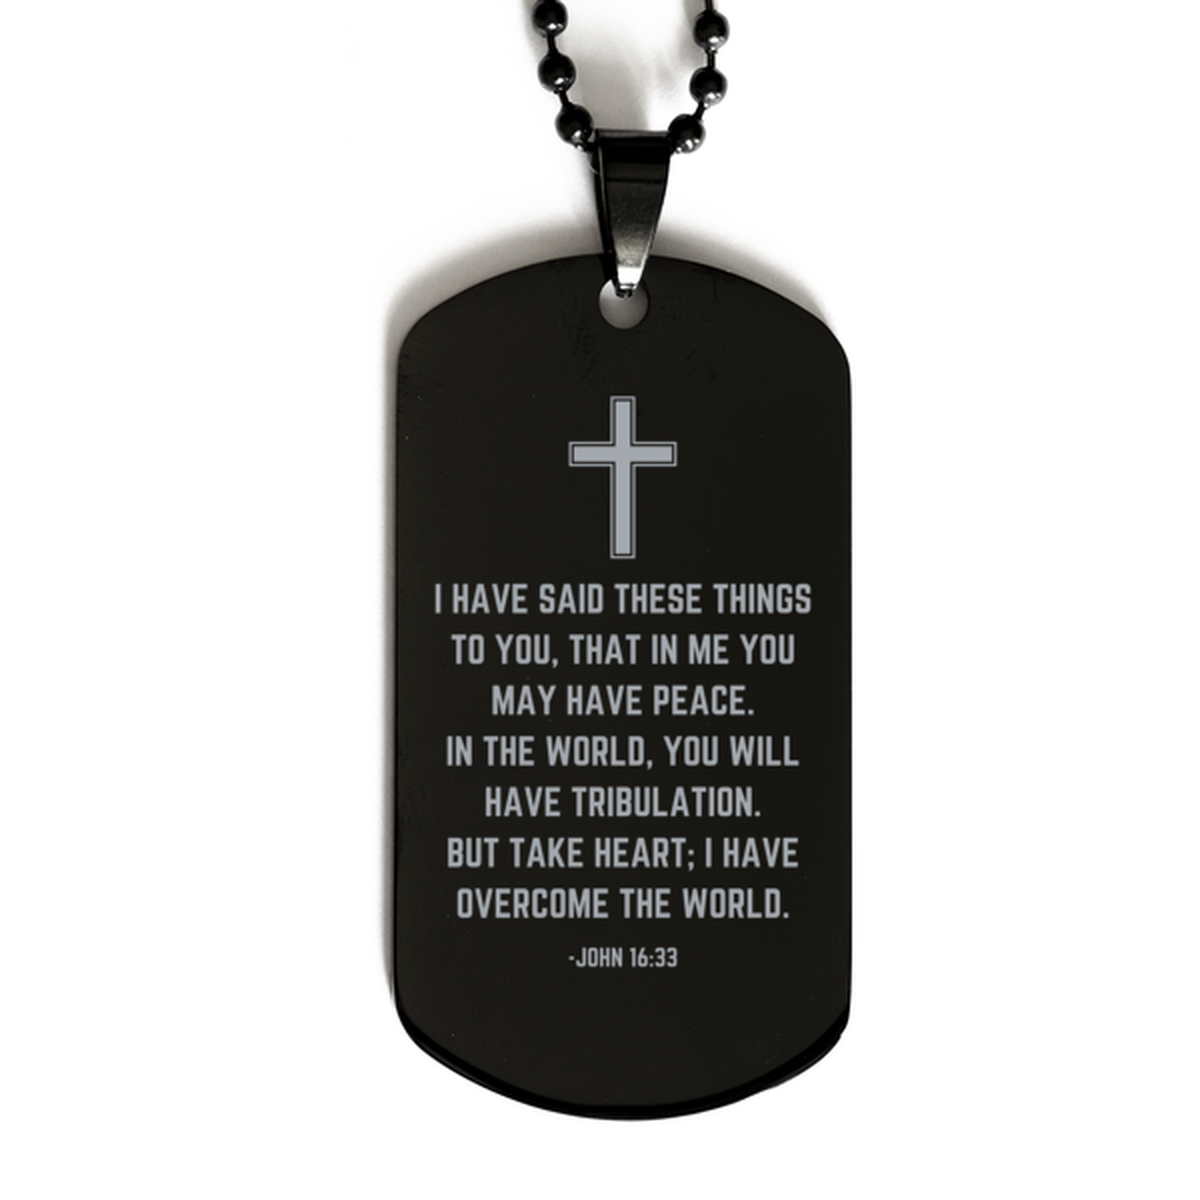 Baptism Gifts For Teenage Boys Girls, Christian Bible Verse Black Dog Tag, I have said these things, Confirmation Gifts, Bible Verse Necklace for Son, Godson, Grandson, Nephew